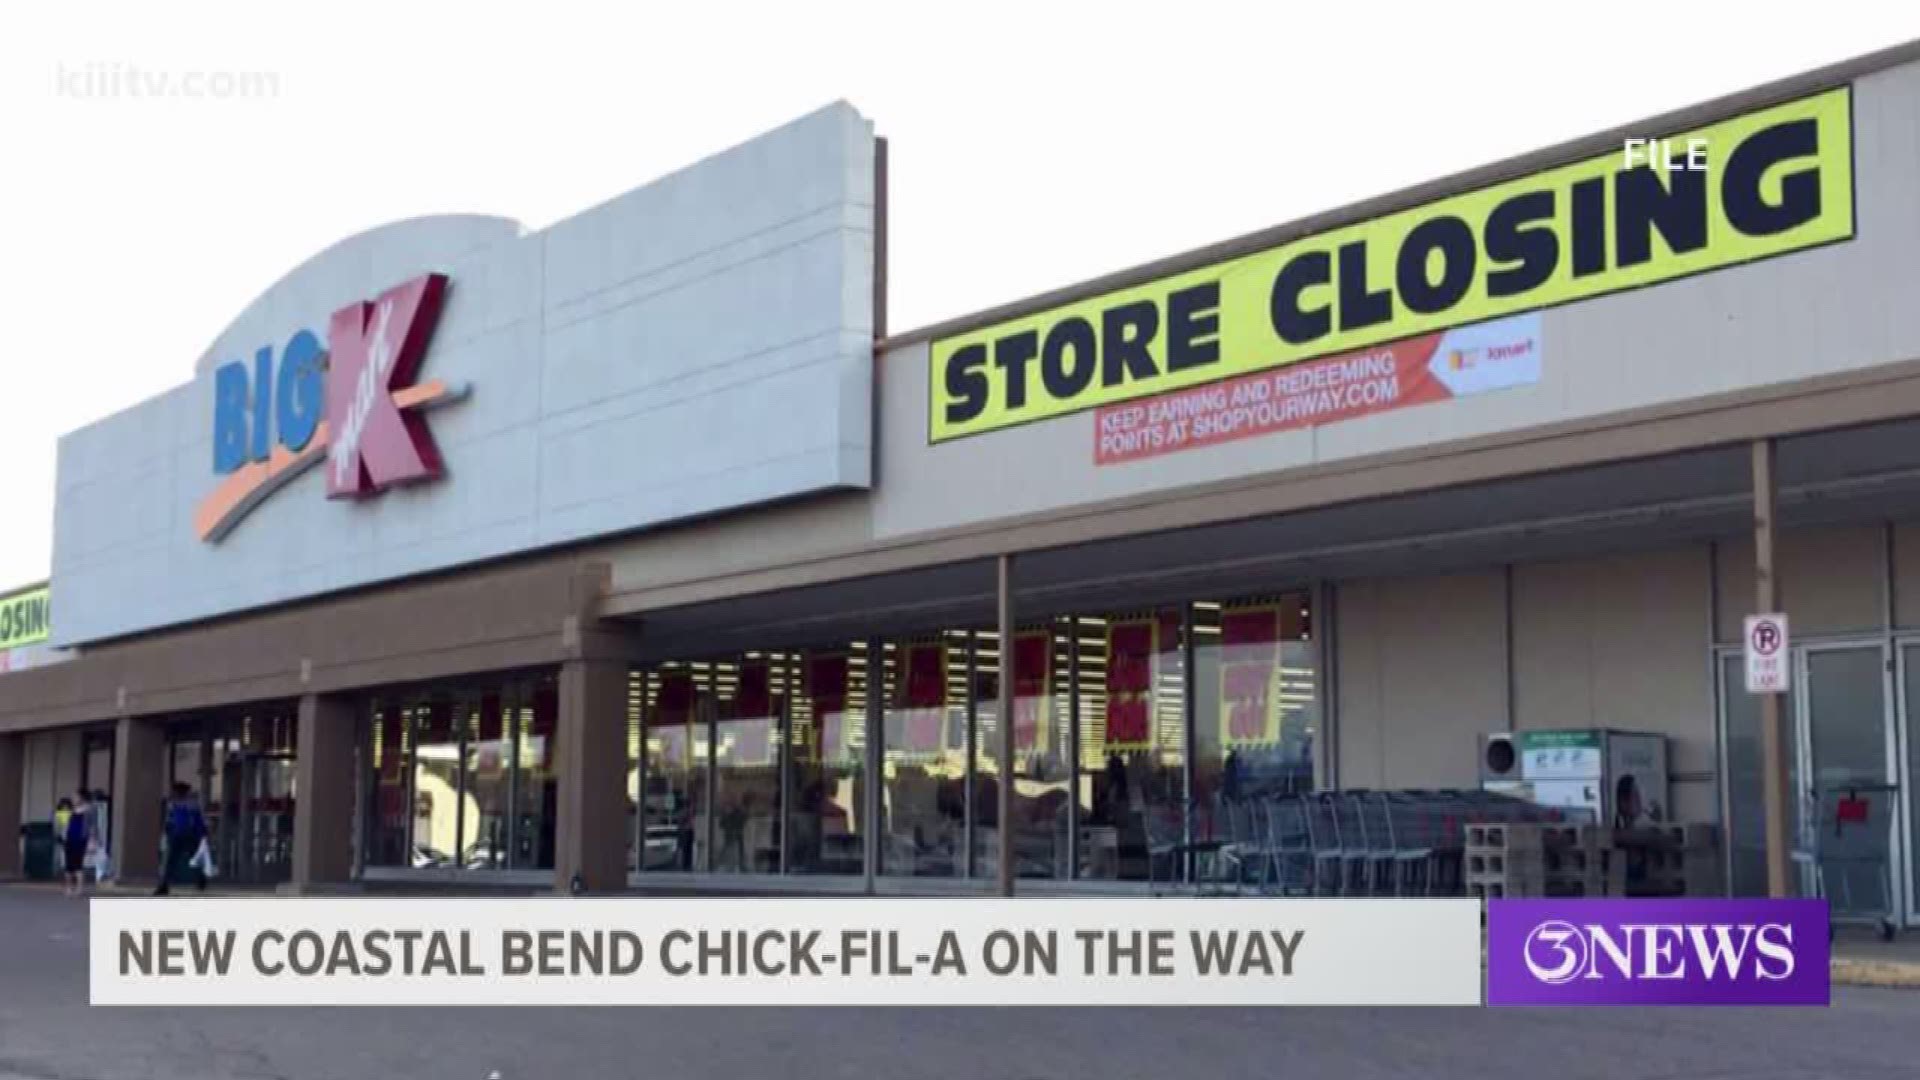 There is a new Chick-fil-A location that will be coming to the Coastal Bend.